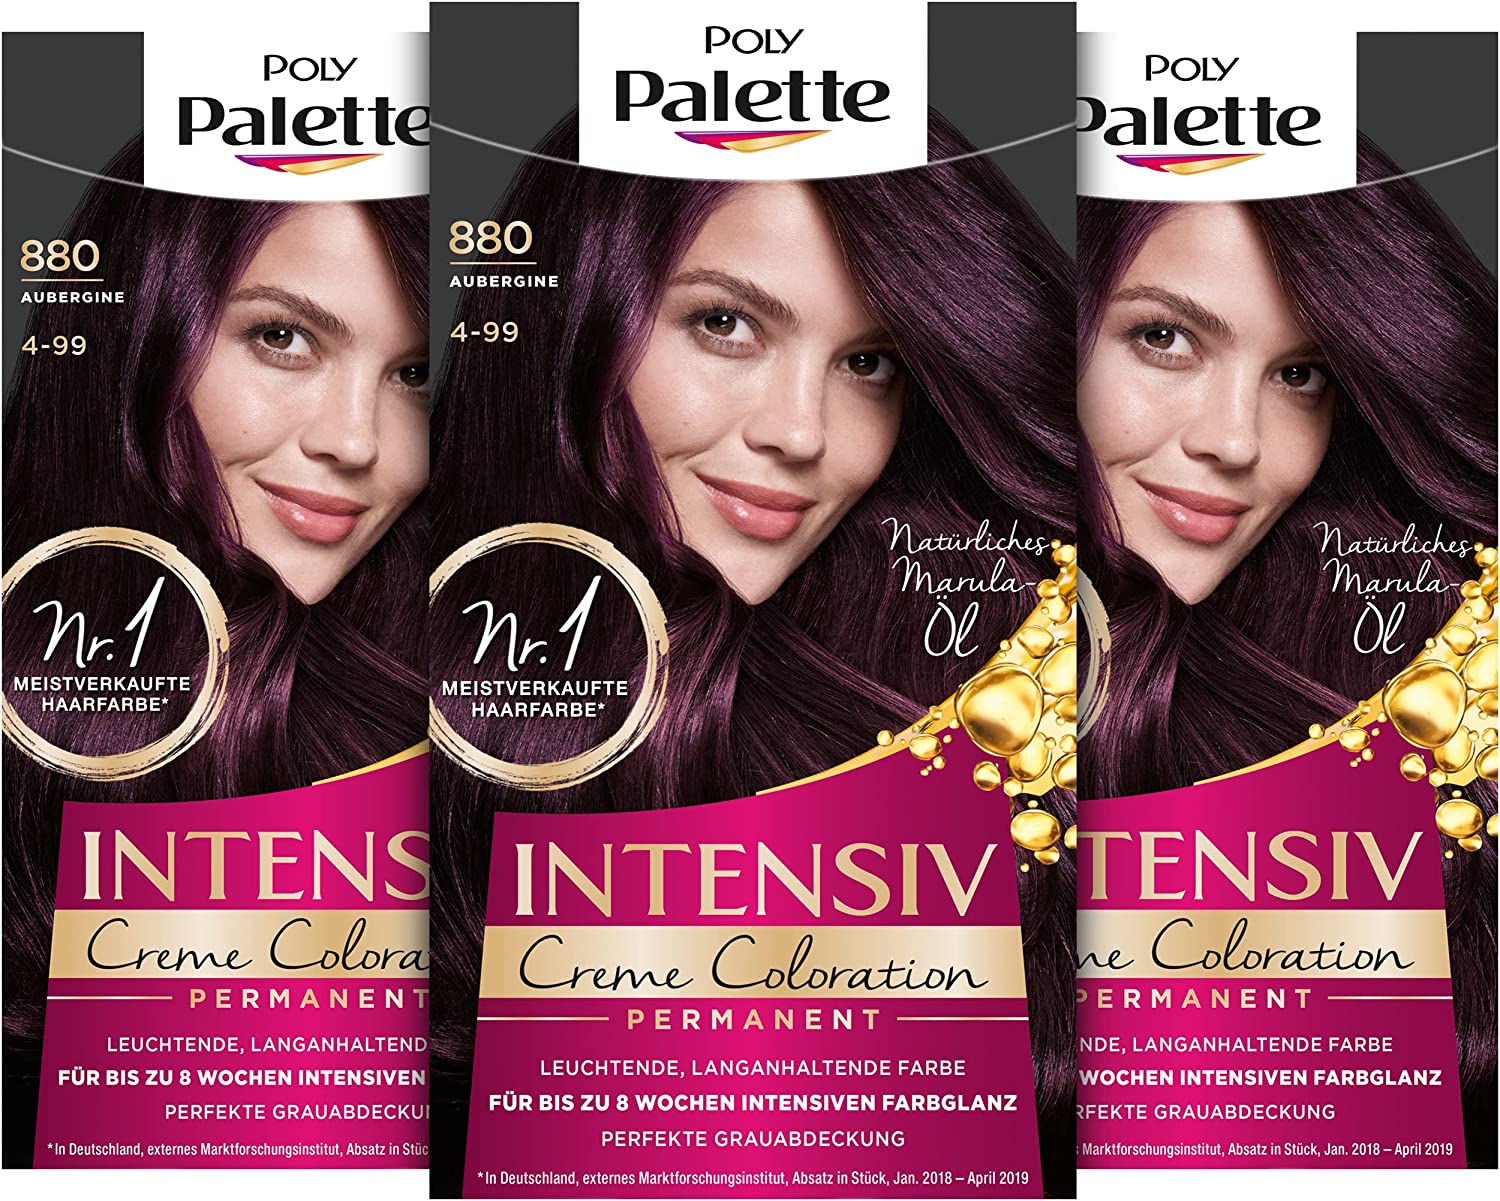 Poly Palette Intensive Cream Colouration 4-99/880 Aubergine Level 3 (3 x 115 ml), Permanent Colouration for up to 8 Weeks of Intense Colour Shine & 100% Grey Coverage